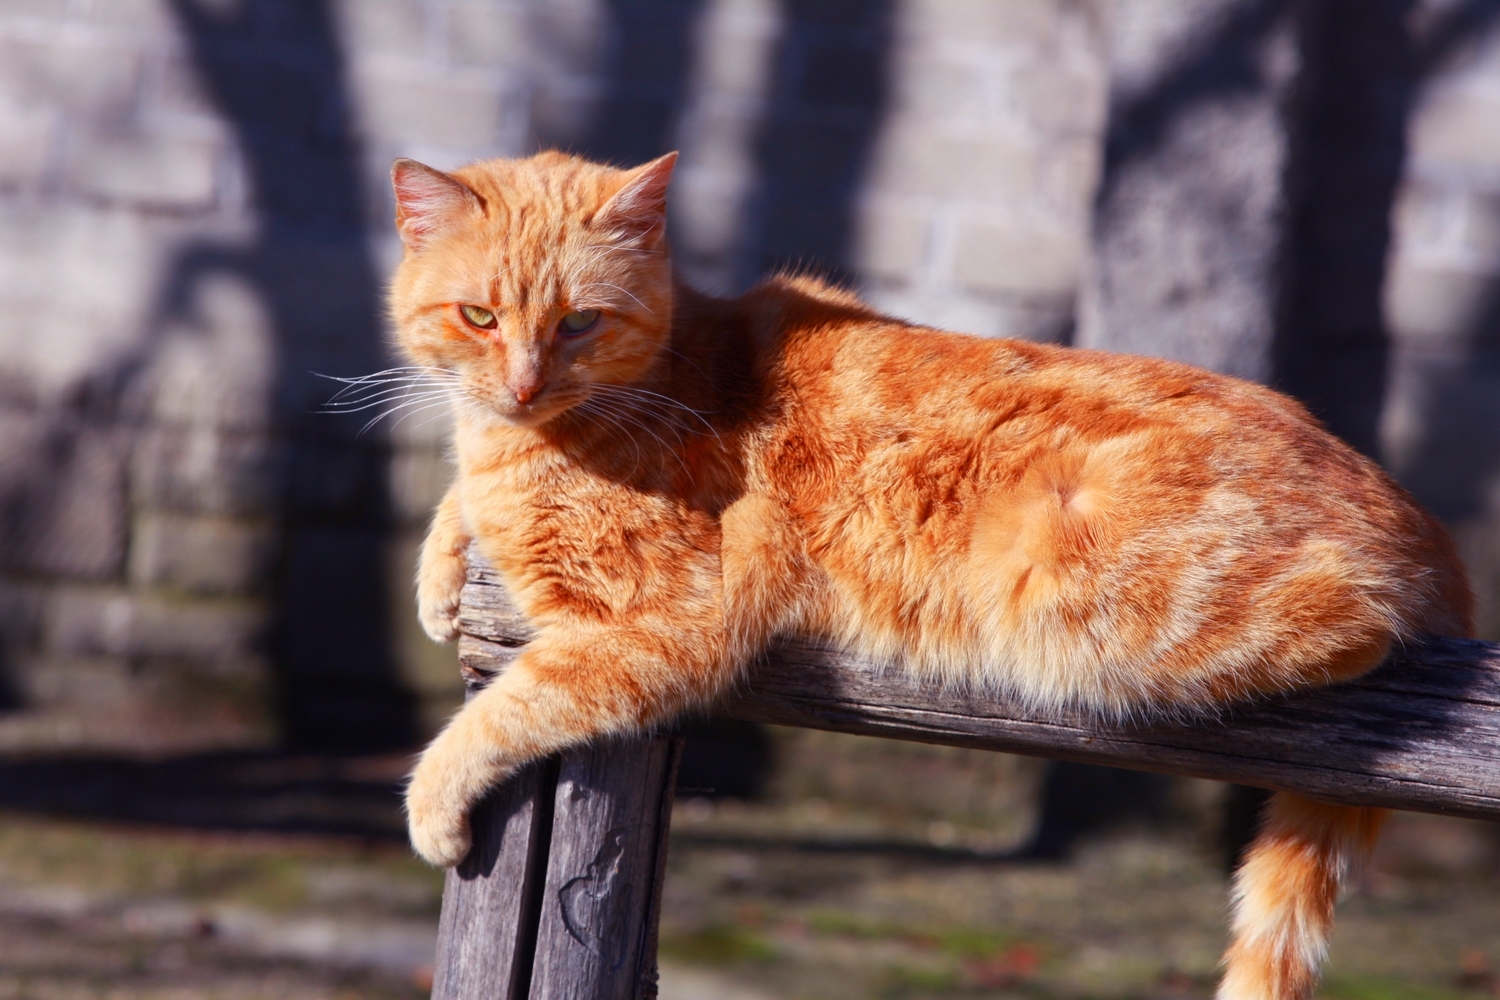 Cat on a fence